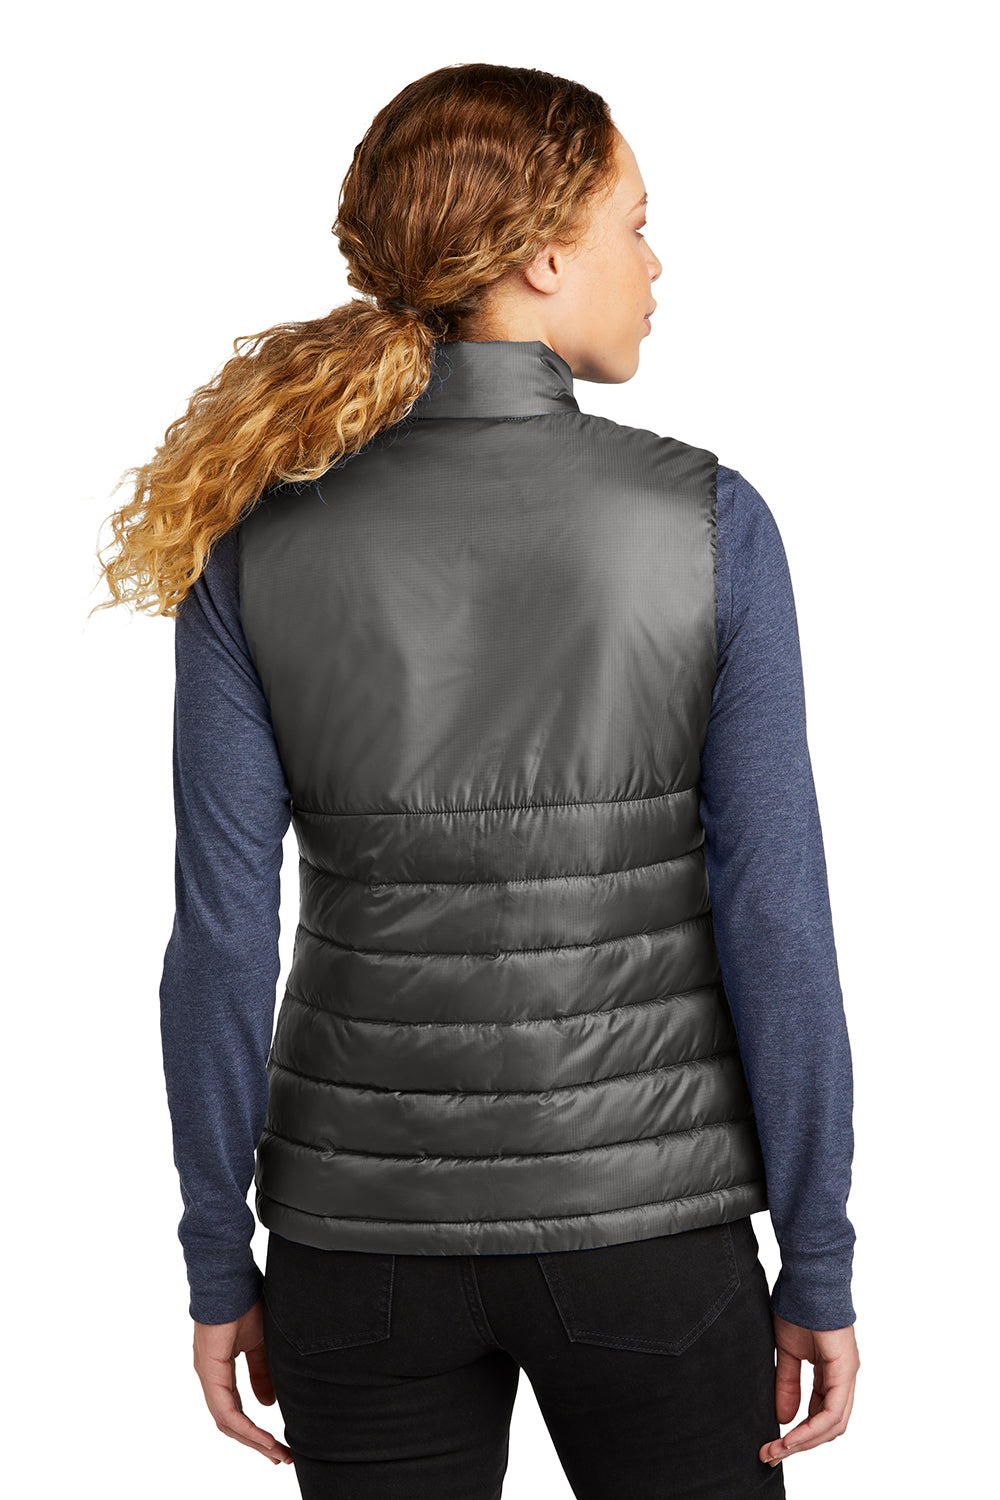 Eddie Bauer EB513 Womens Water Resistant Quilted Full Zip Vest Iron Gate Grey Model Back